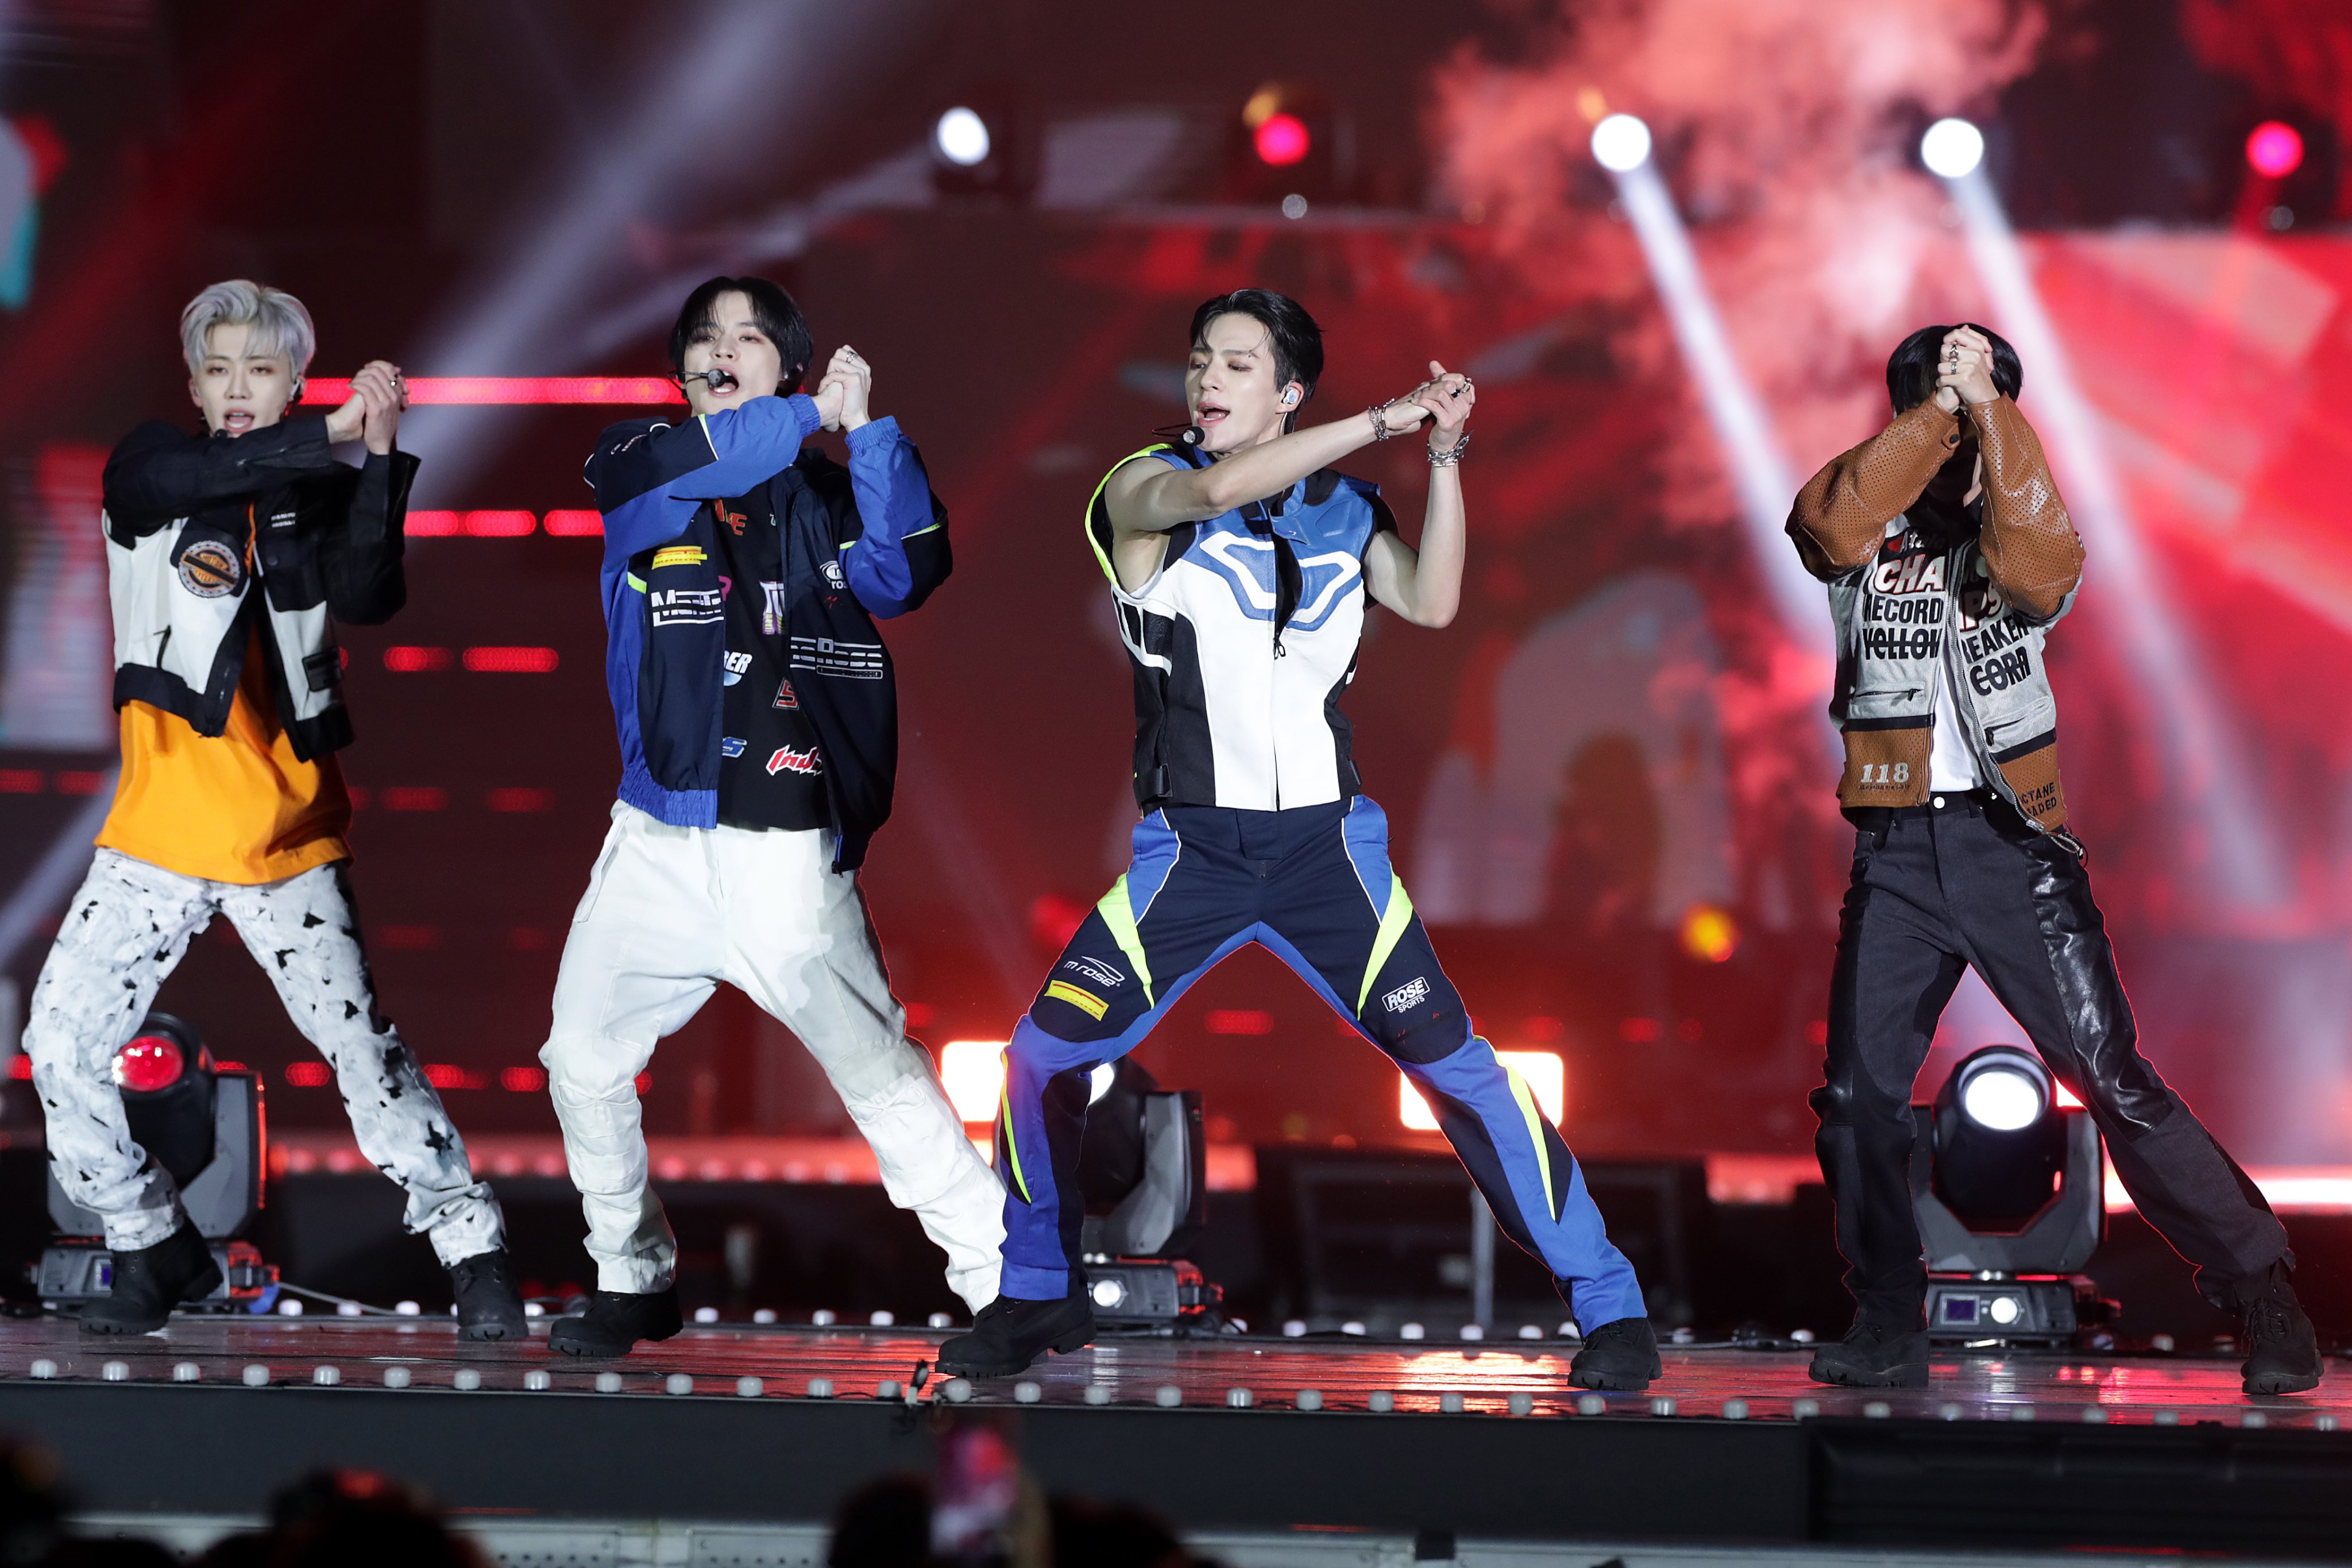 NCT Dream perform on stage at Jamsil Sports Complex in Seoul, South Korea, in October, 2022. Photo: WireImage